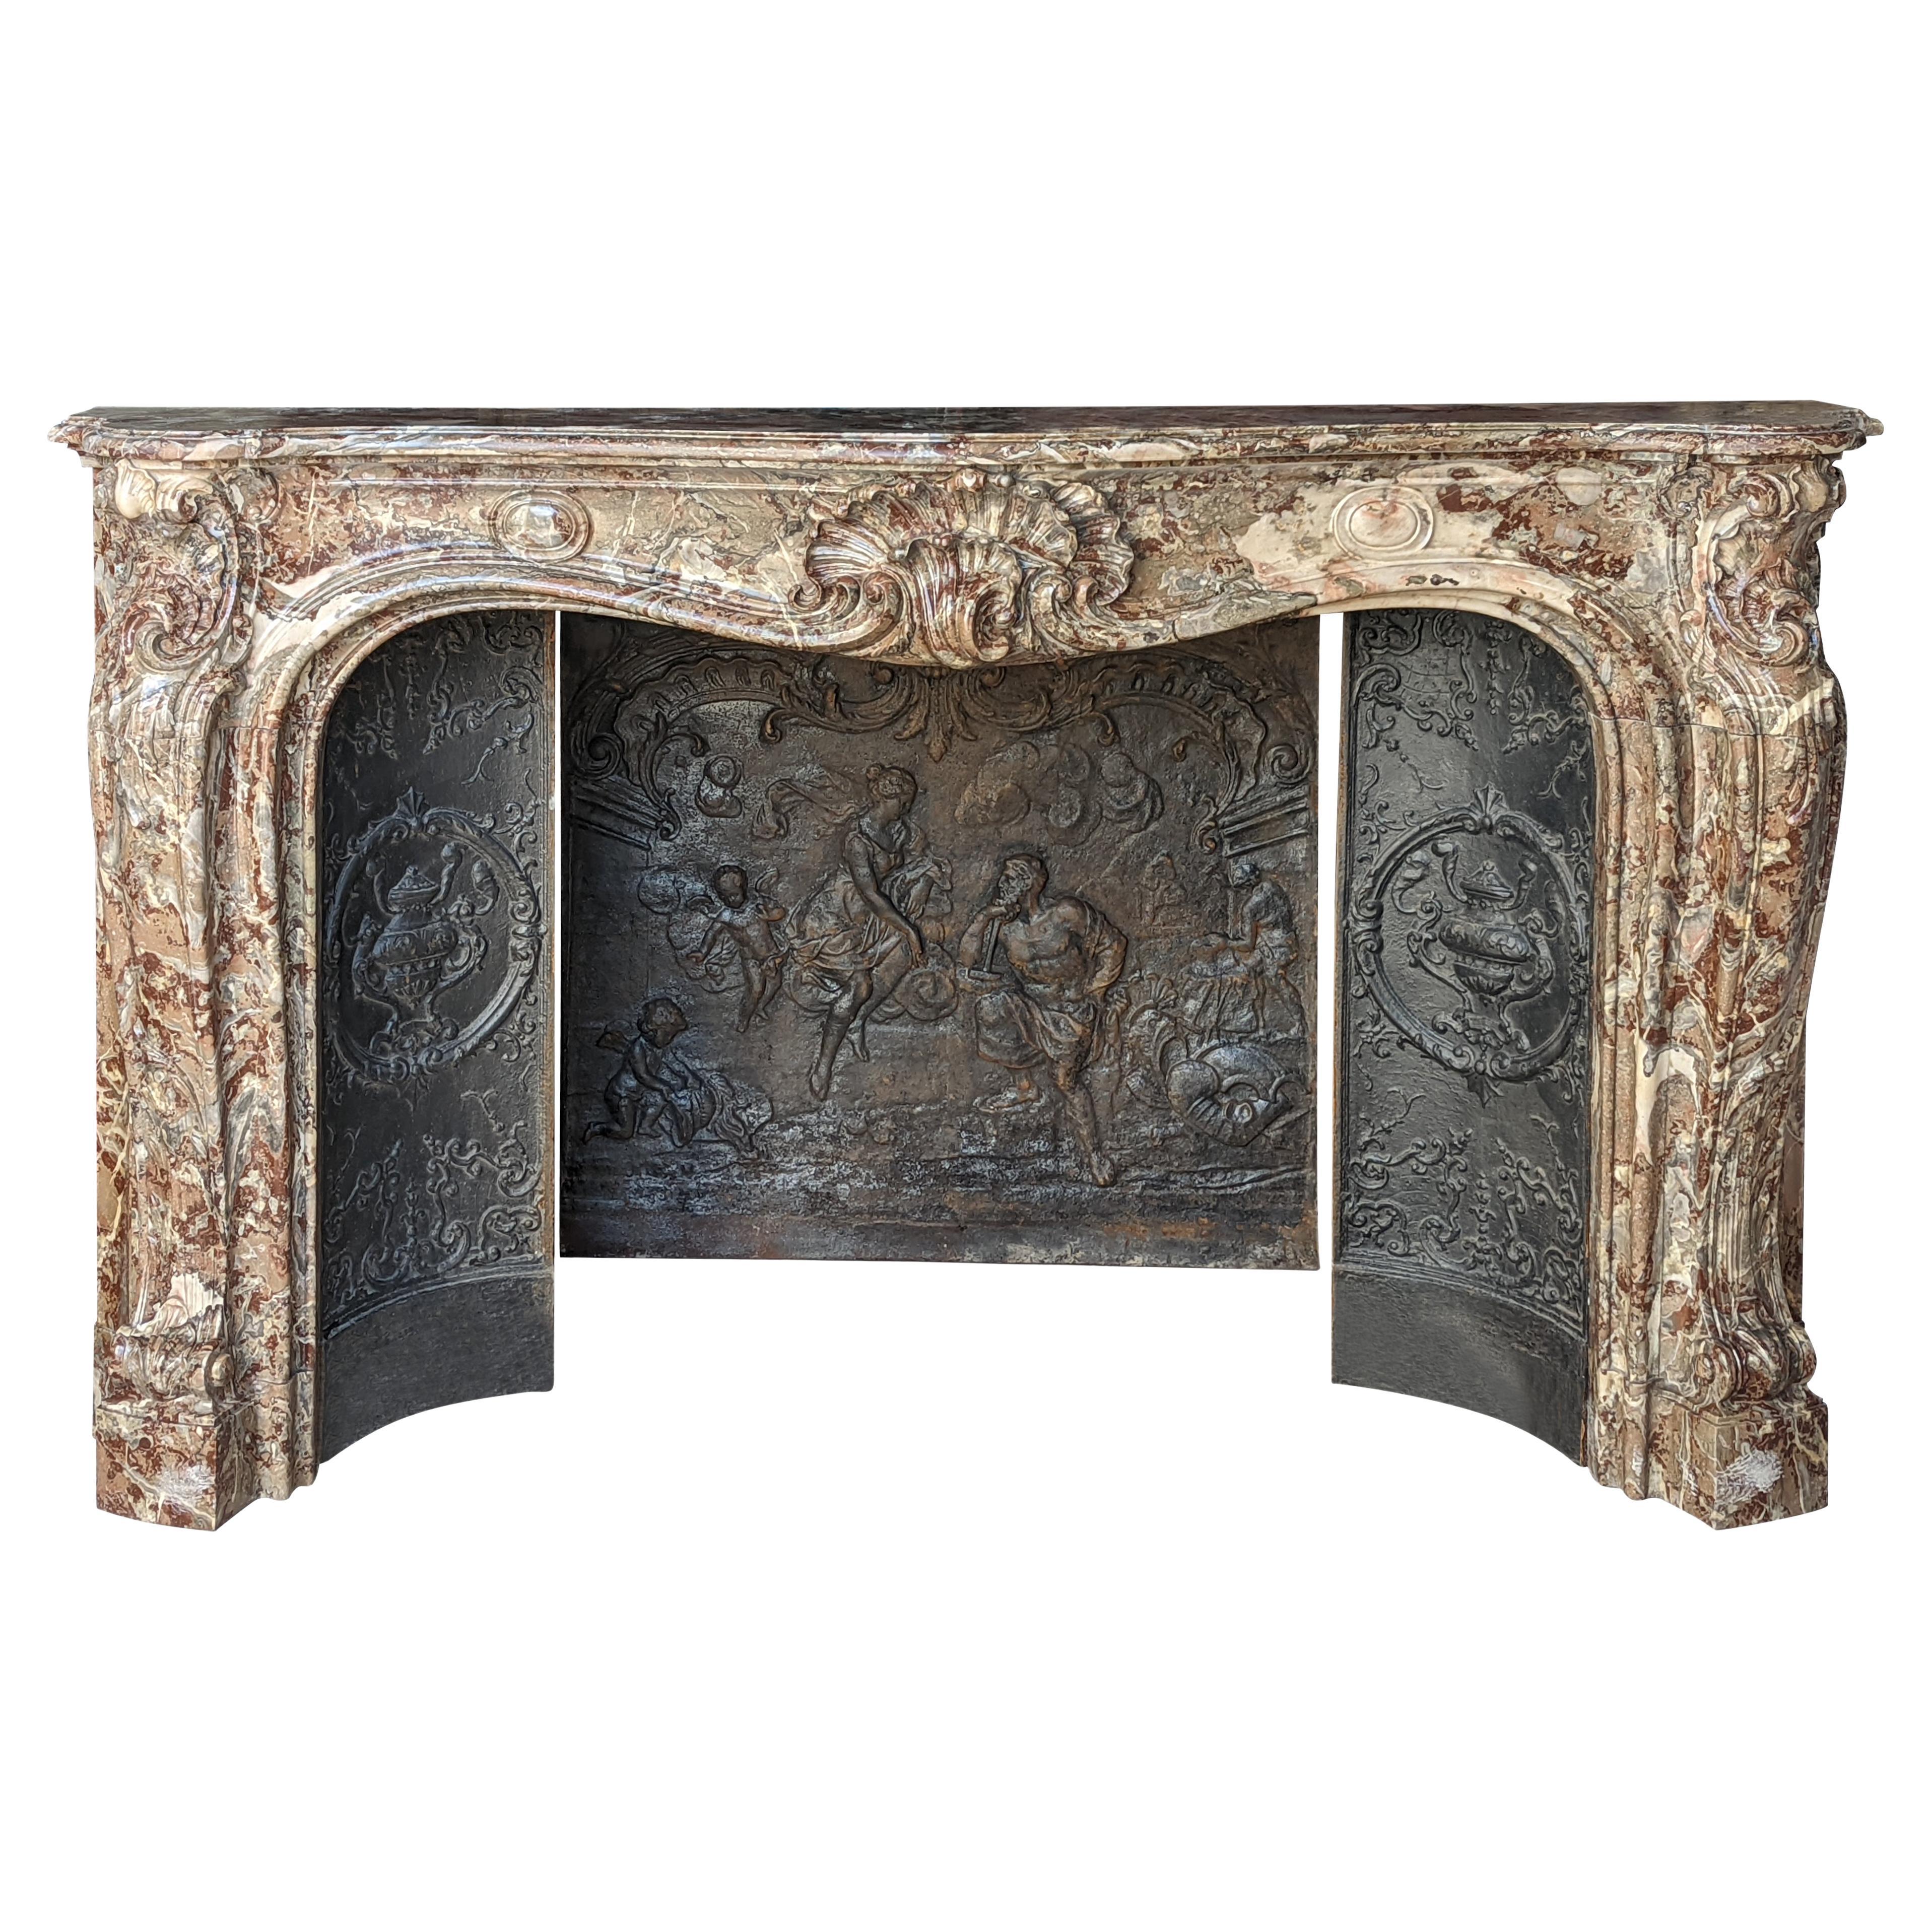 Louis XV style fireplace in Rouge Royal marble with an asymmetrical shell